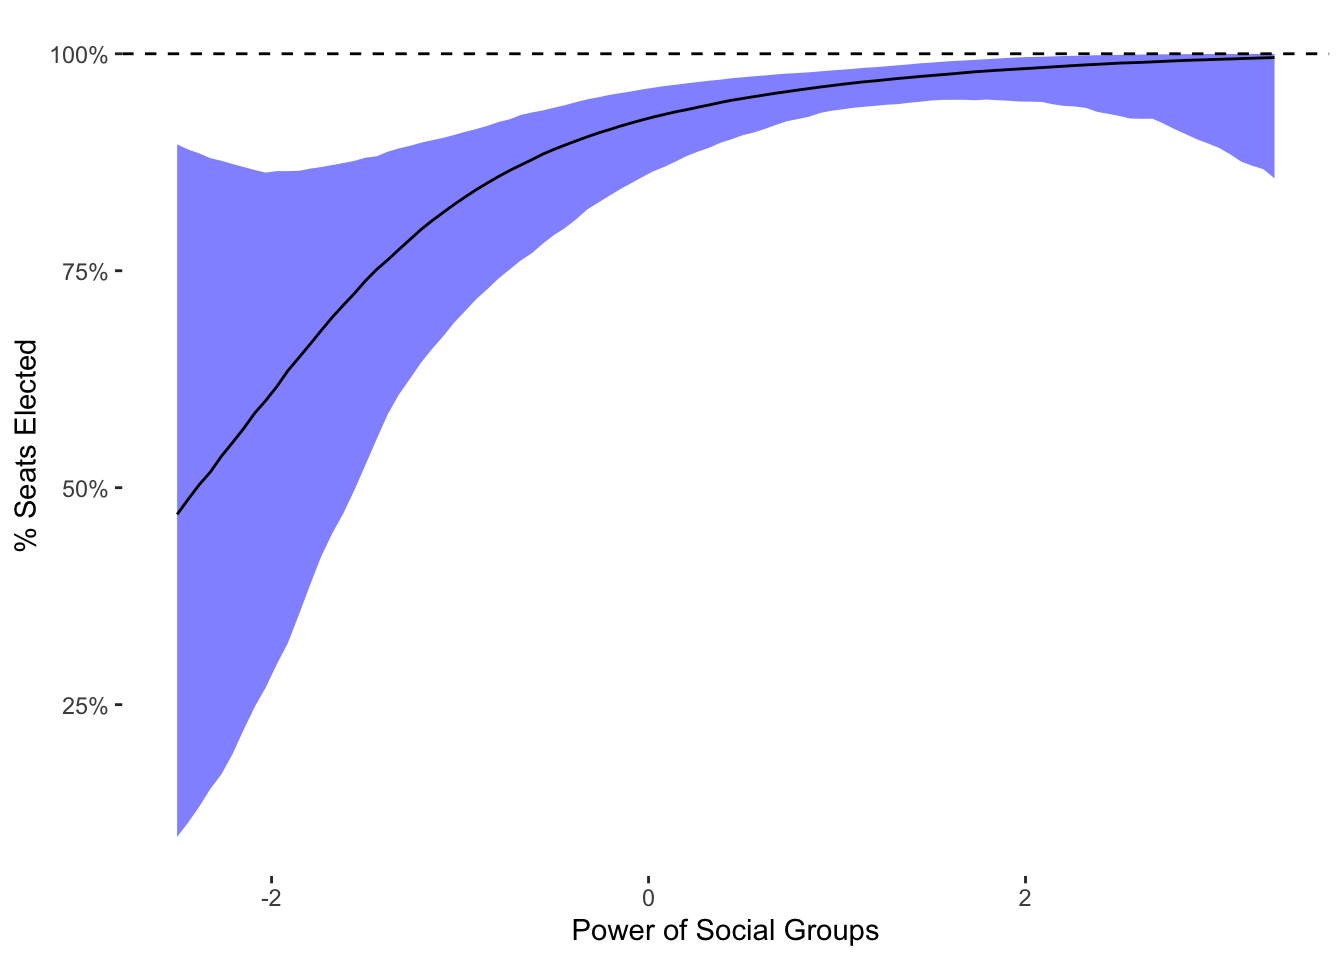 OLS Predicted Values of Elected Lower Chamber Seats Given Power of Social Groups